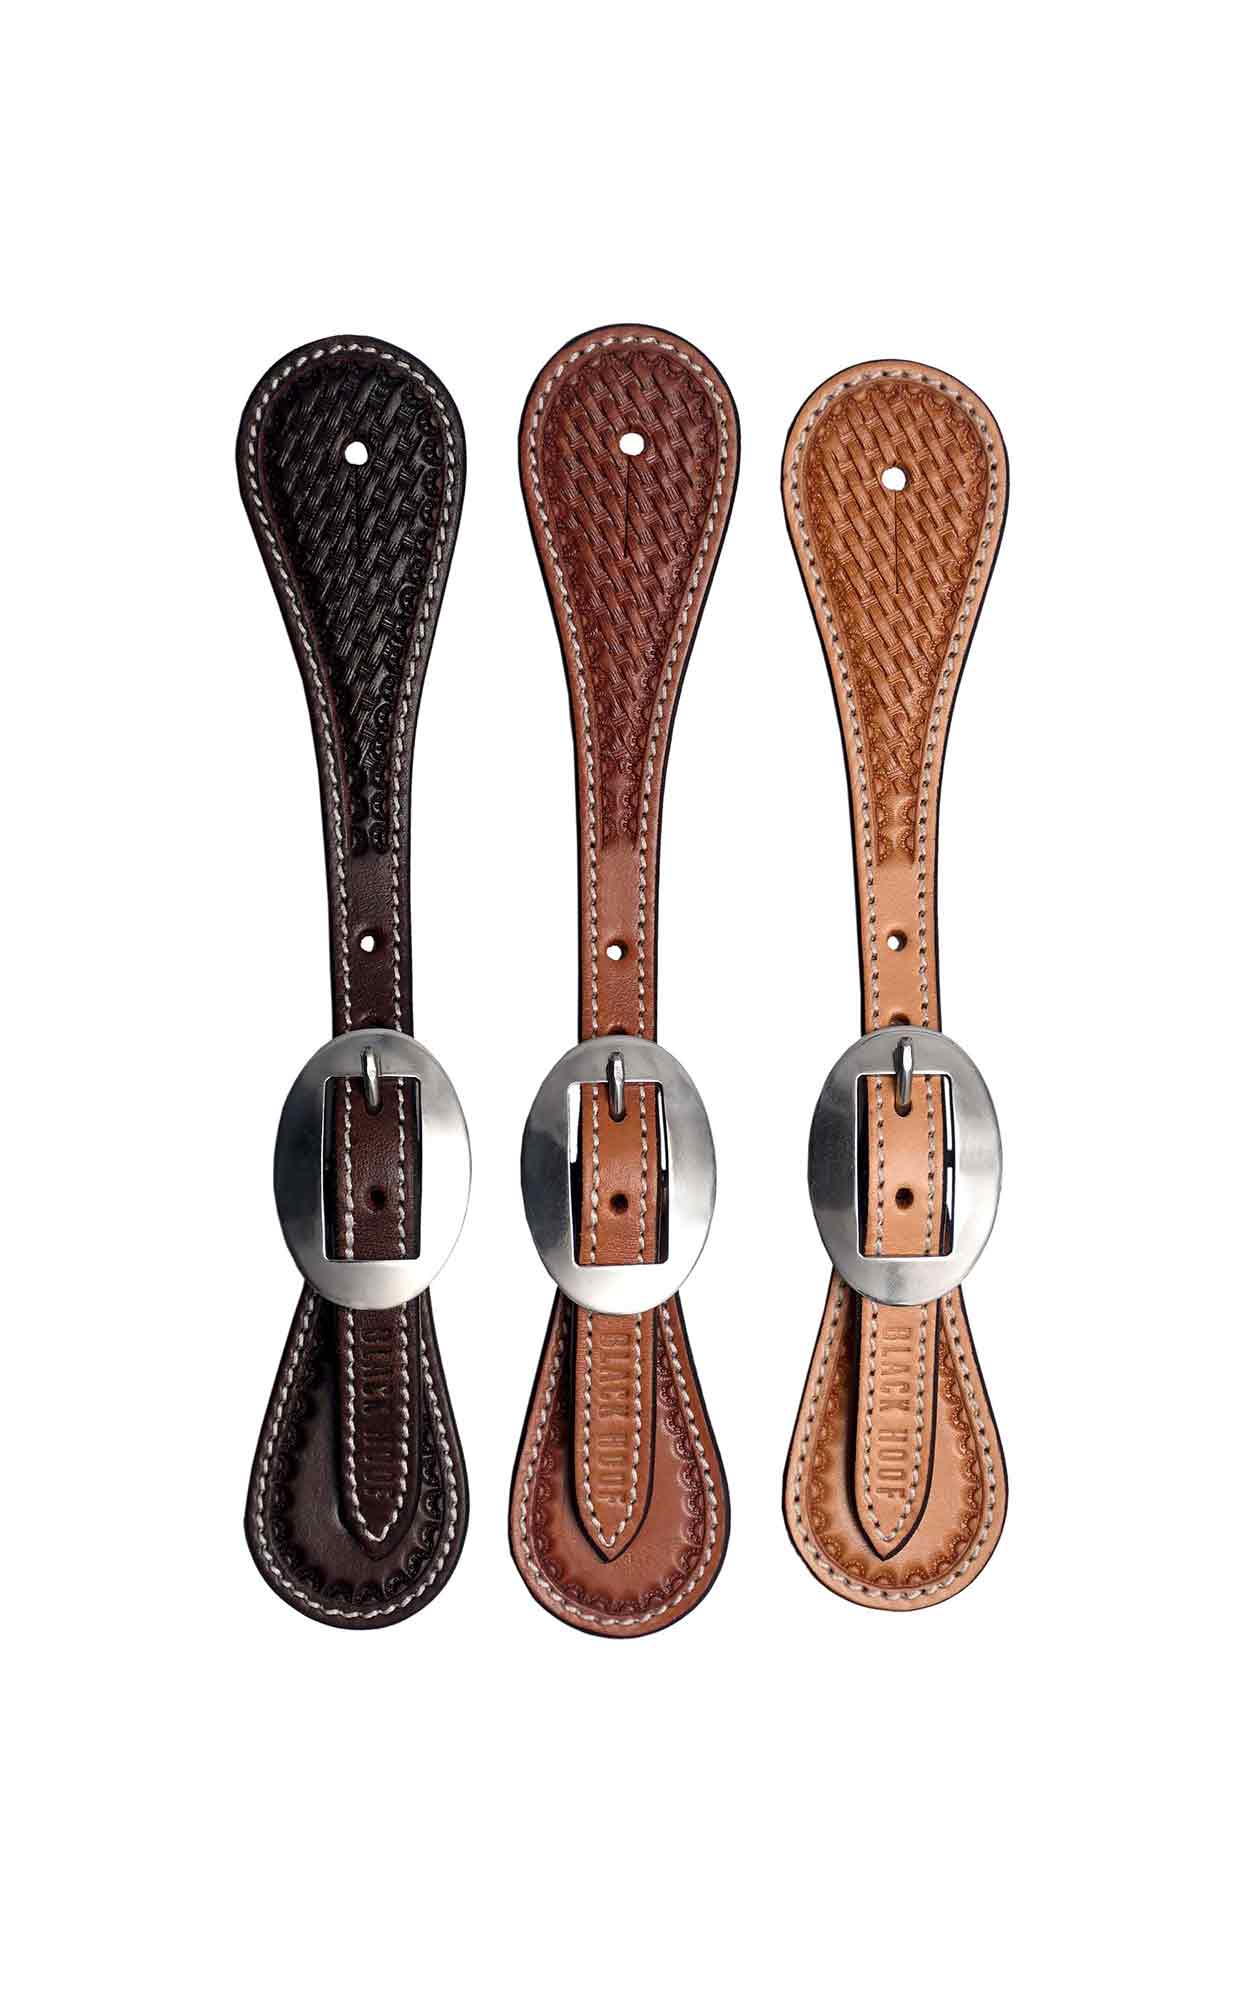 BLACK HOOF Basket Tooled Leather Spur Straps for Horse Riders | Western Men, Women, Adjustable Single Ply Spur Straps | Equestrian Accessories